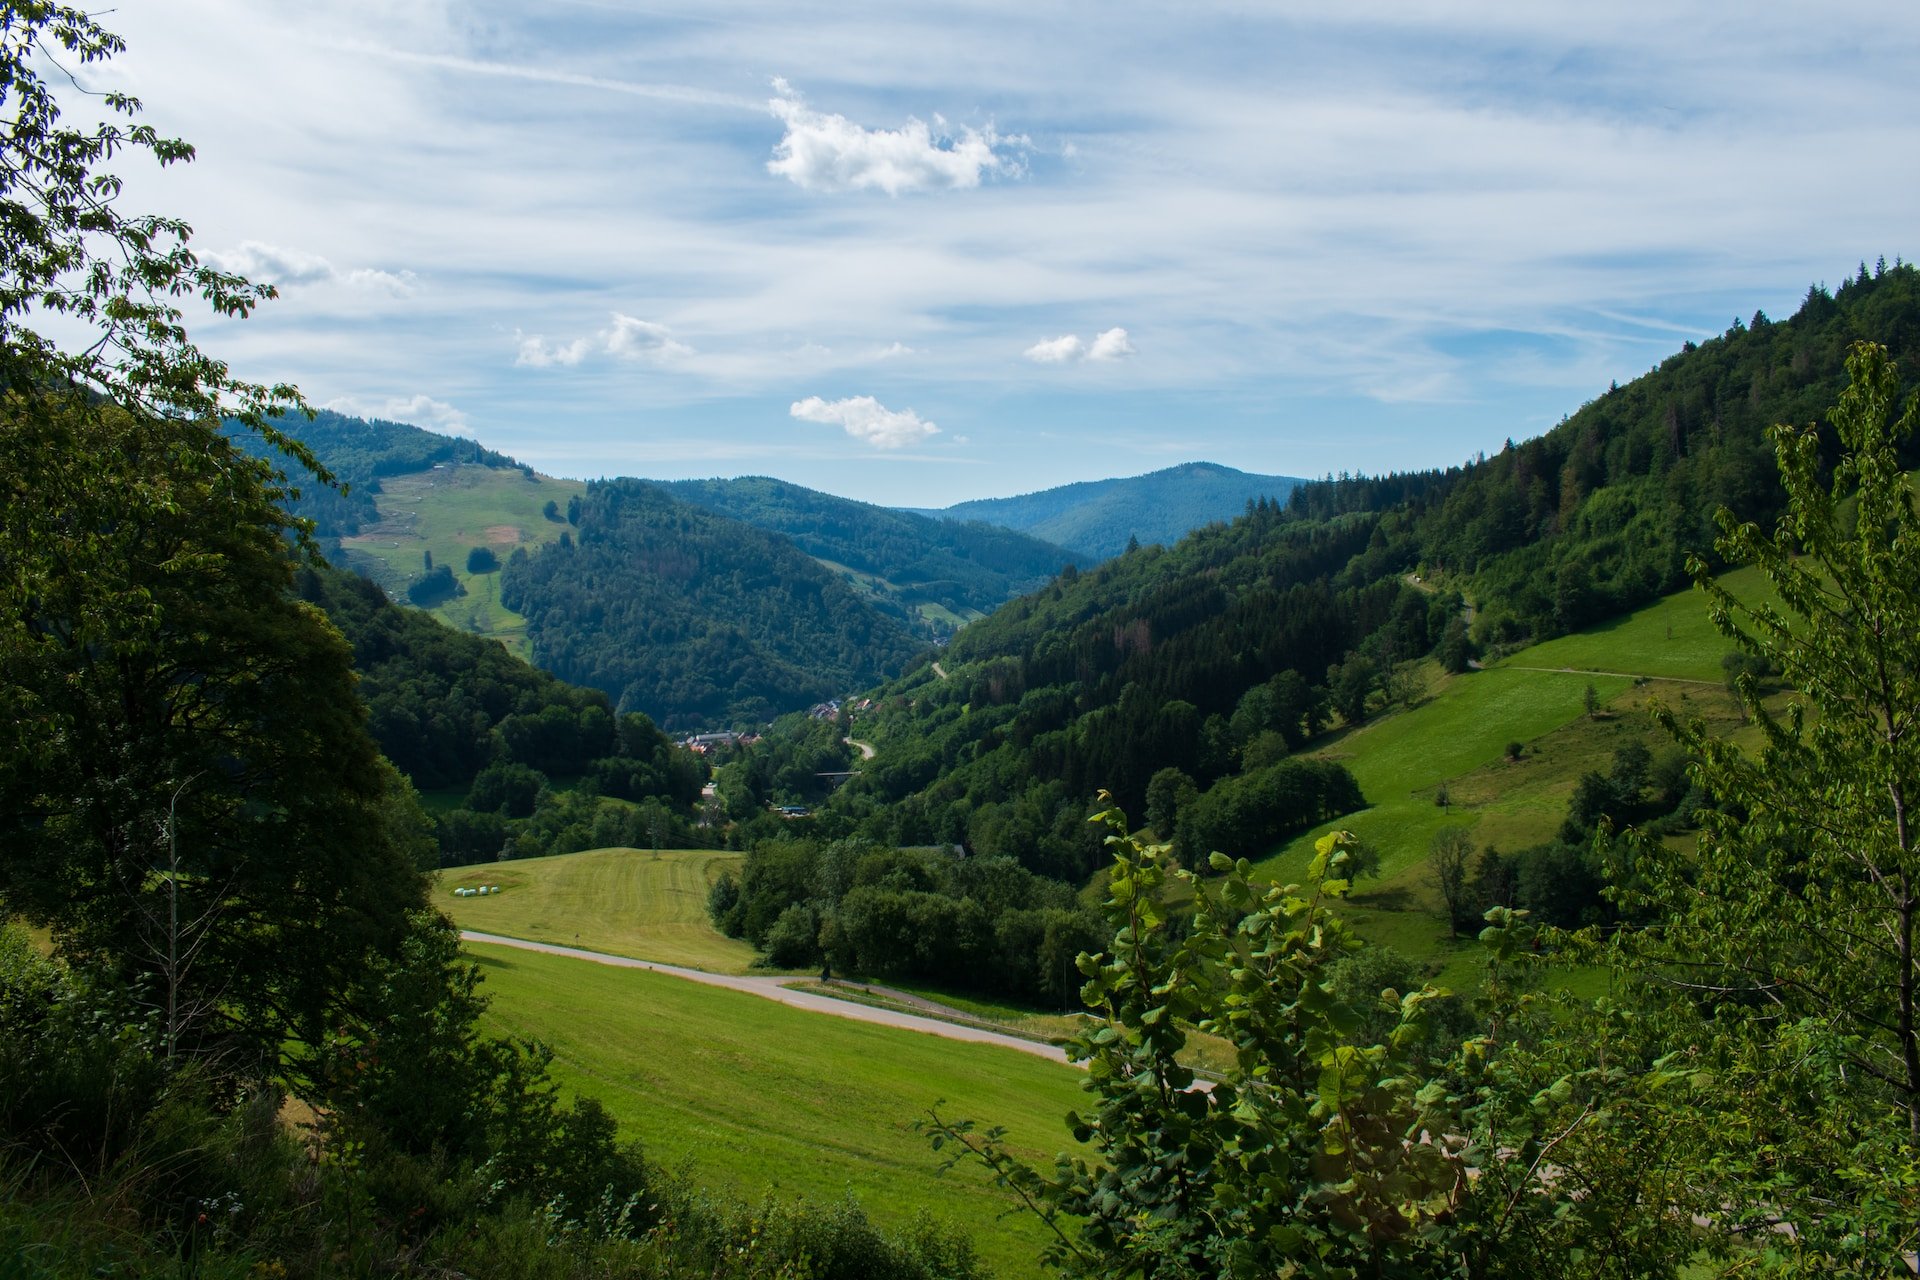 The Black Forest in Germany (photo: Rach Sam)